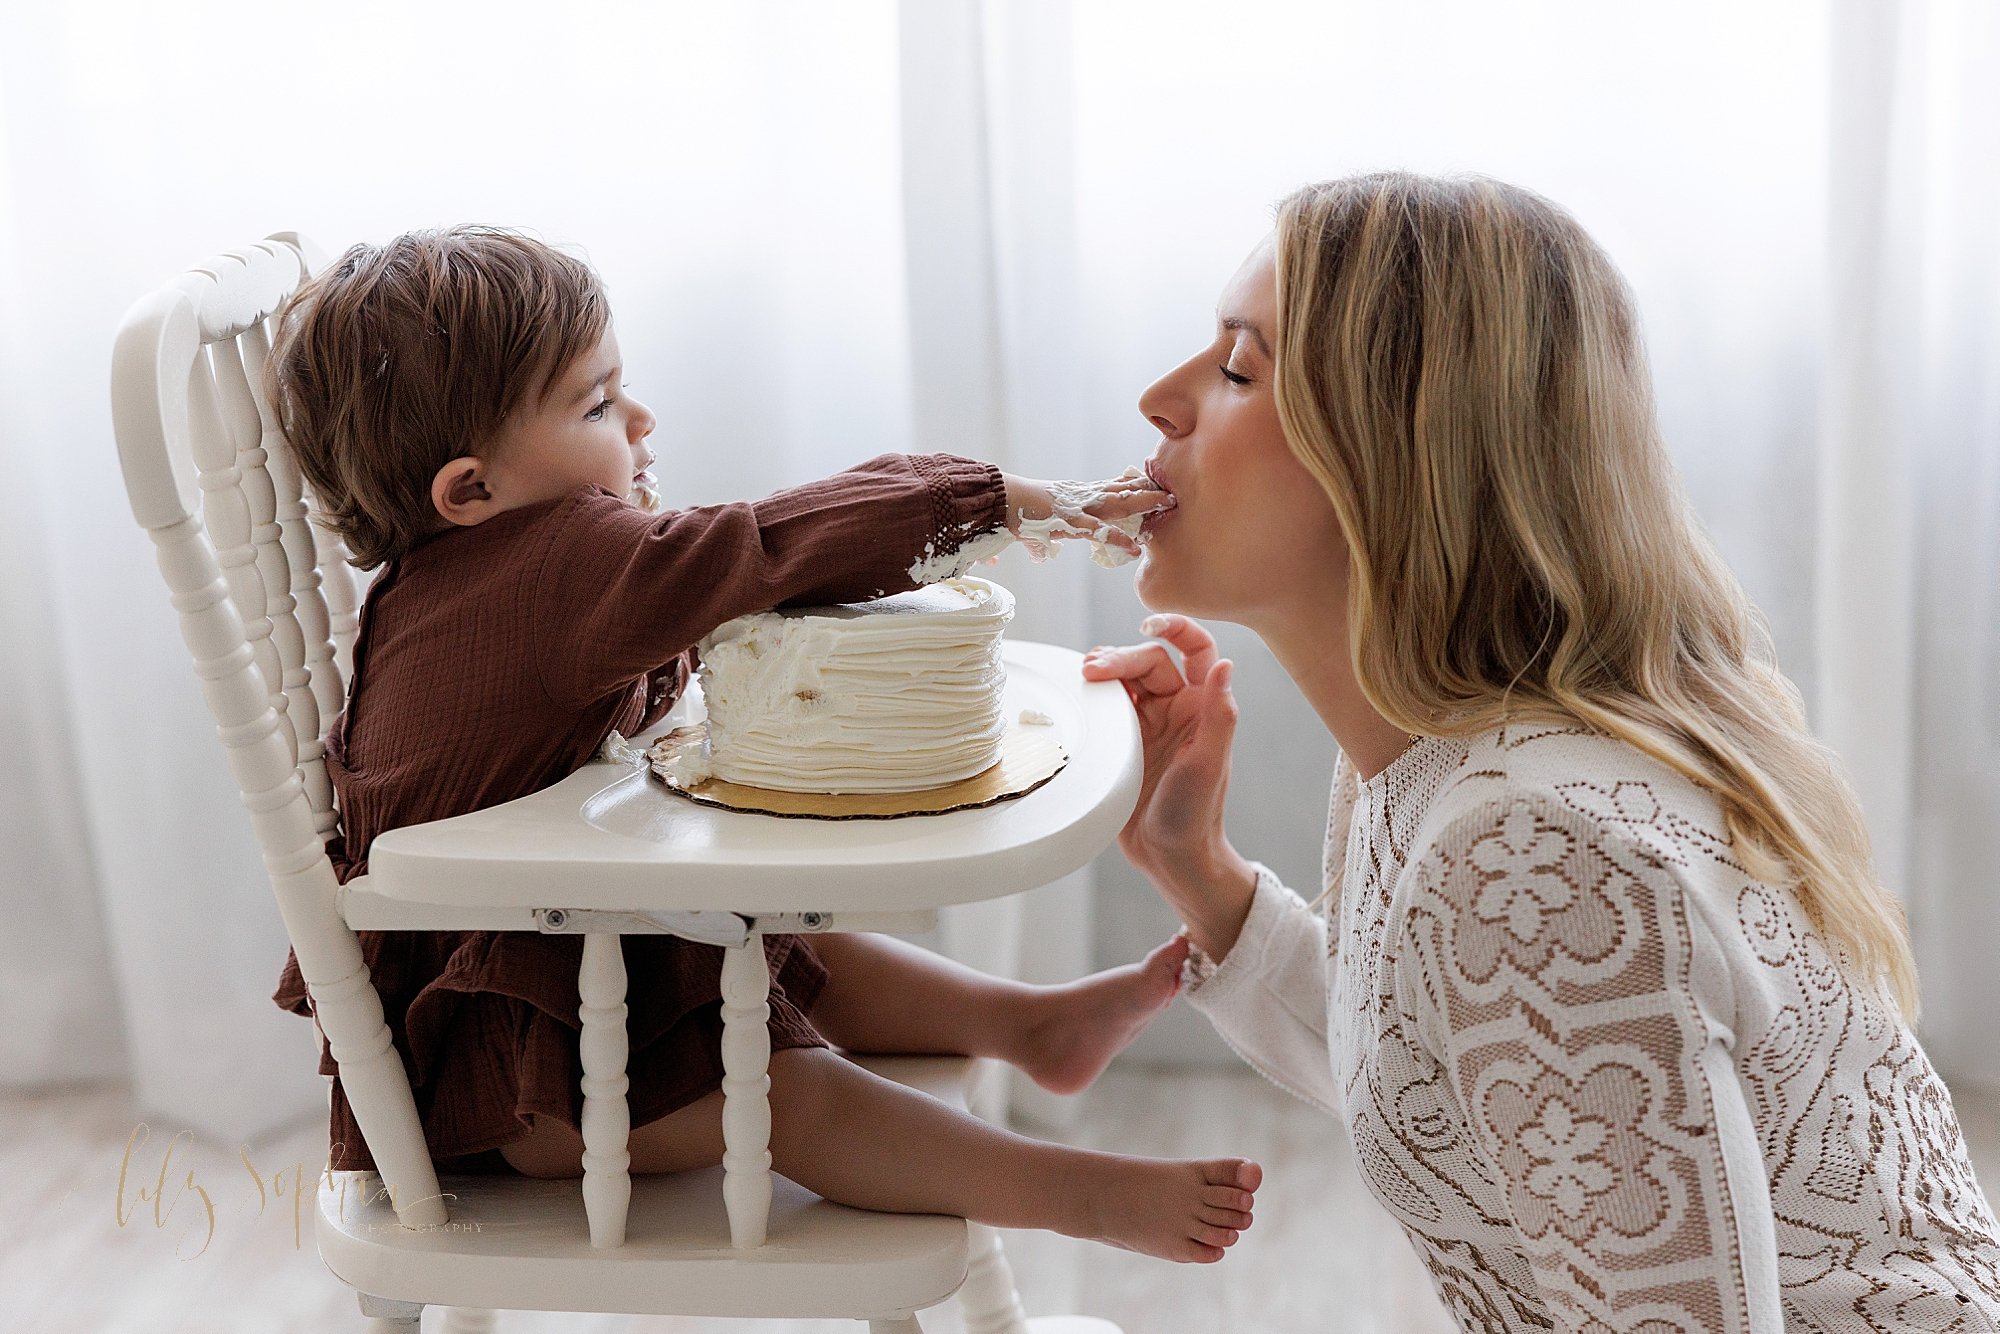  First birthday smash cake photo session with the one year old little girl sitting in an antique high chair as she feeds icing to her mother who is squatting in front of her taken in  front of a window streaming natural light in a photography studio 